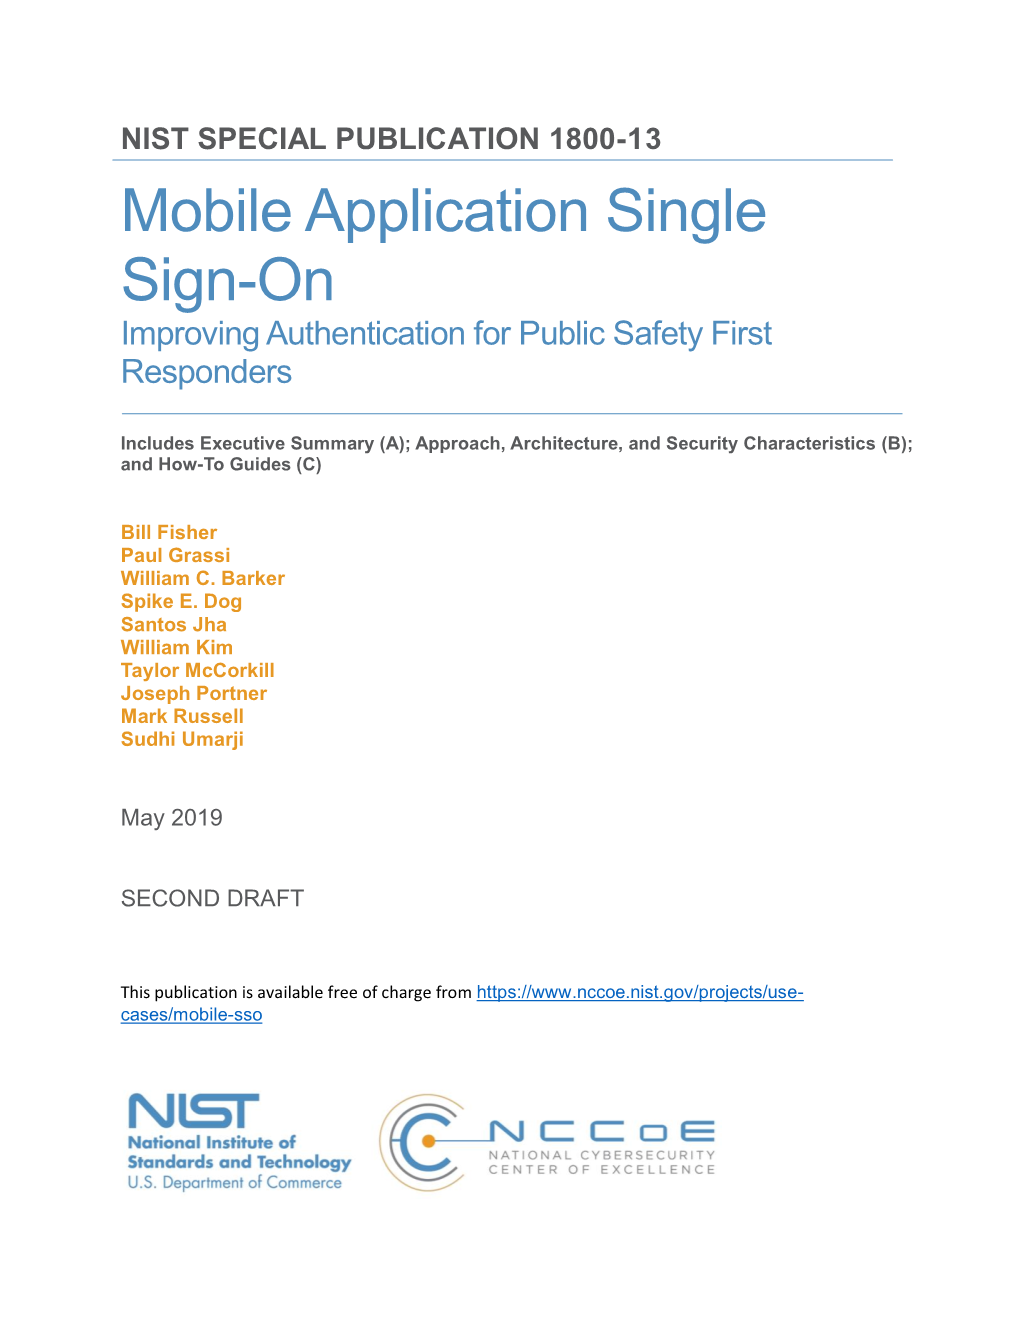 Mobile Application Single Sign-On Improving Authentication for Public Safety First Responders